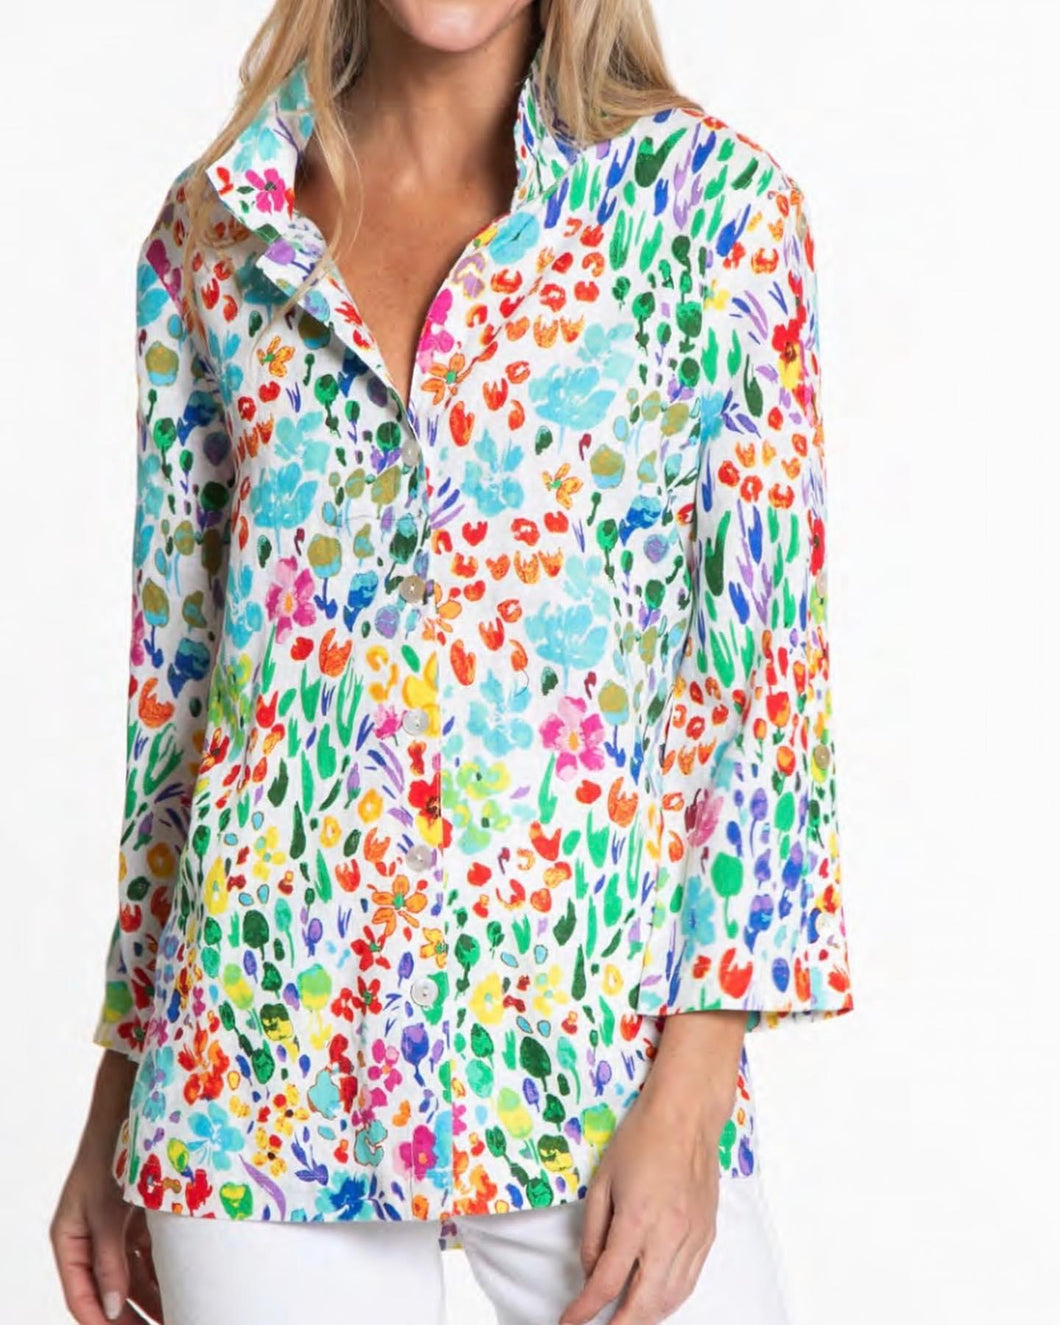 Floral Patterned Tunic Blouse